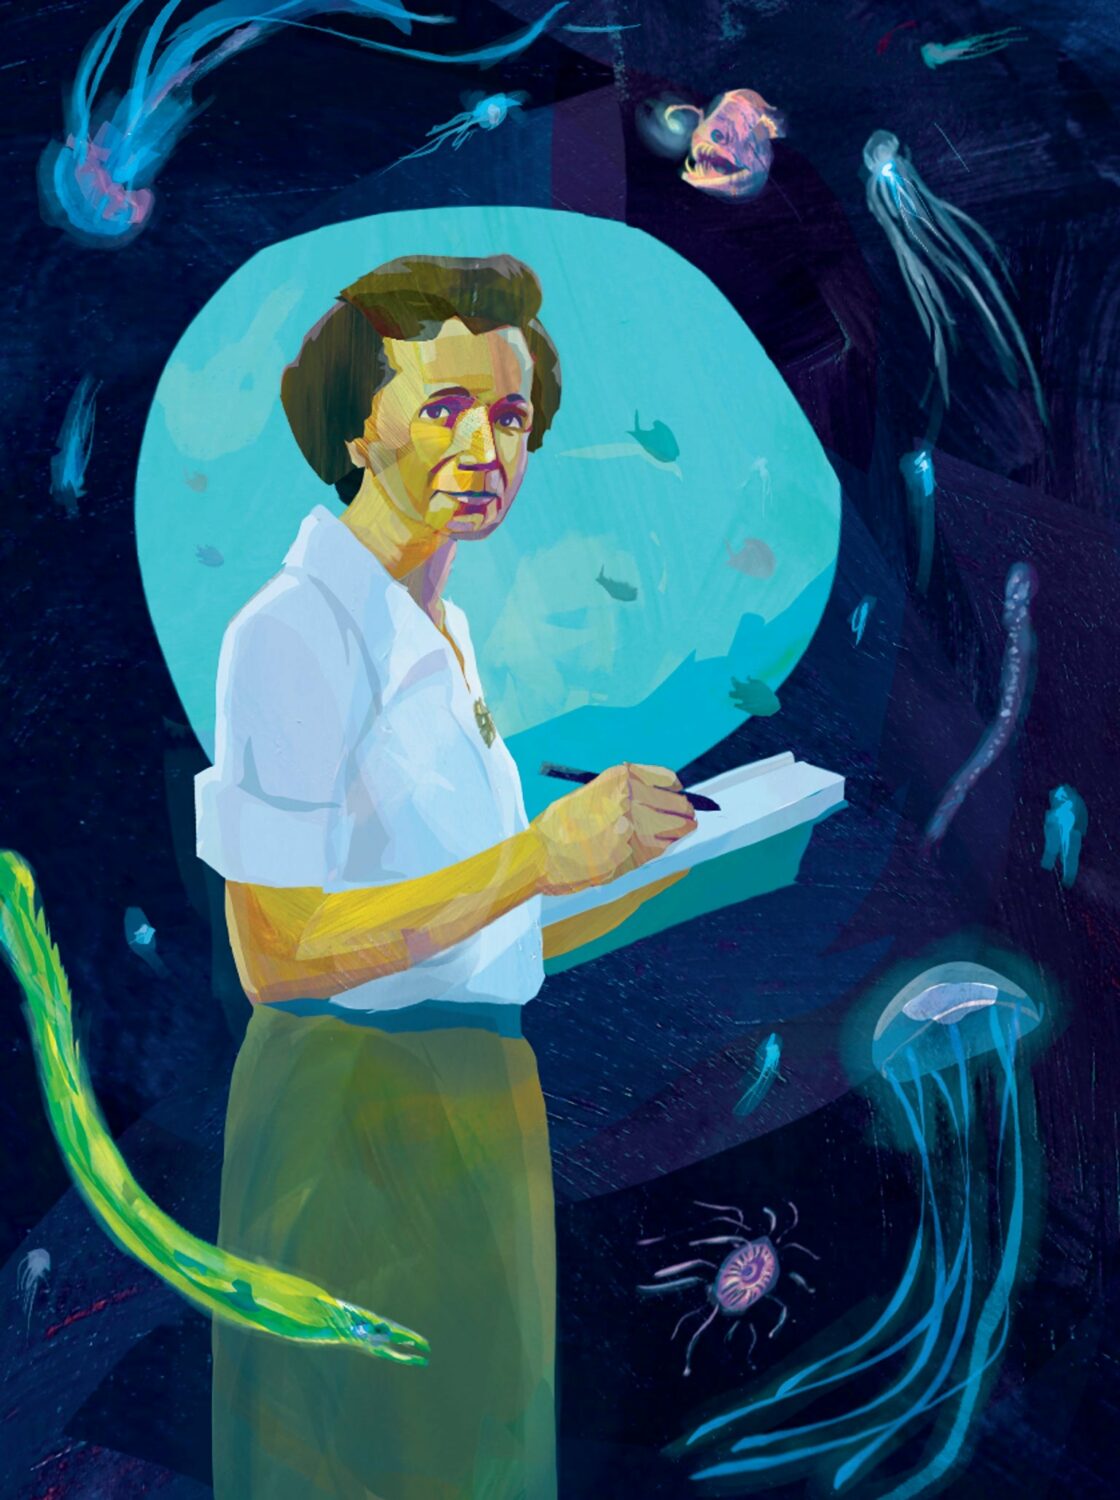 Rachel Carson’s Explorations of the Sea, the Human Relationship with Elephants, and More